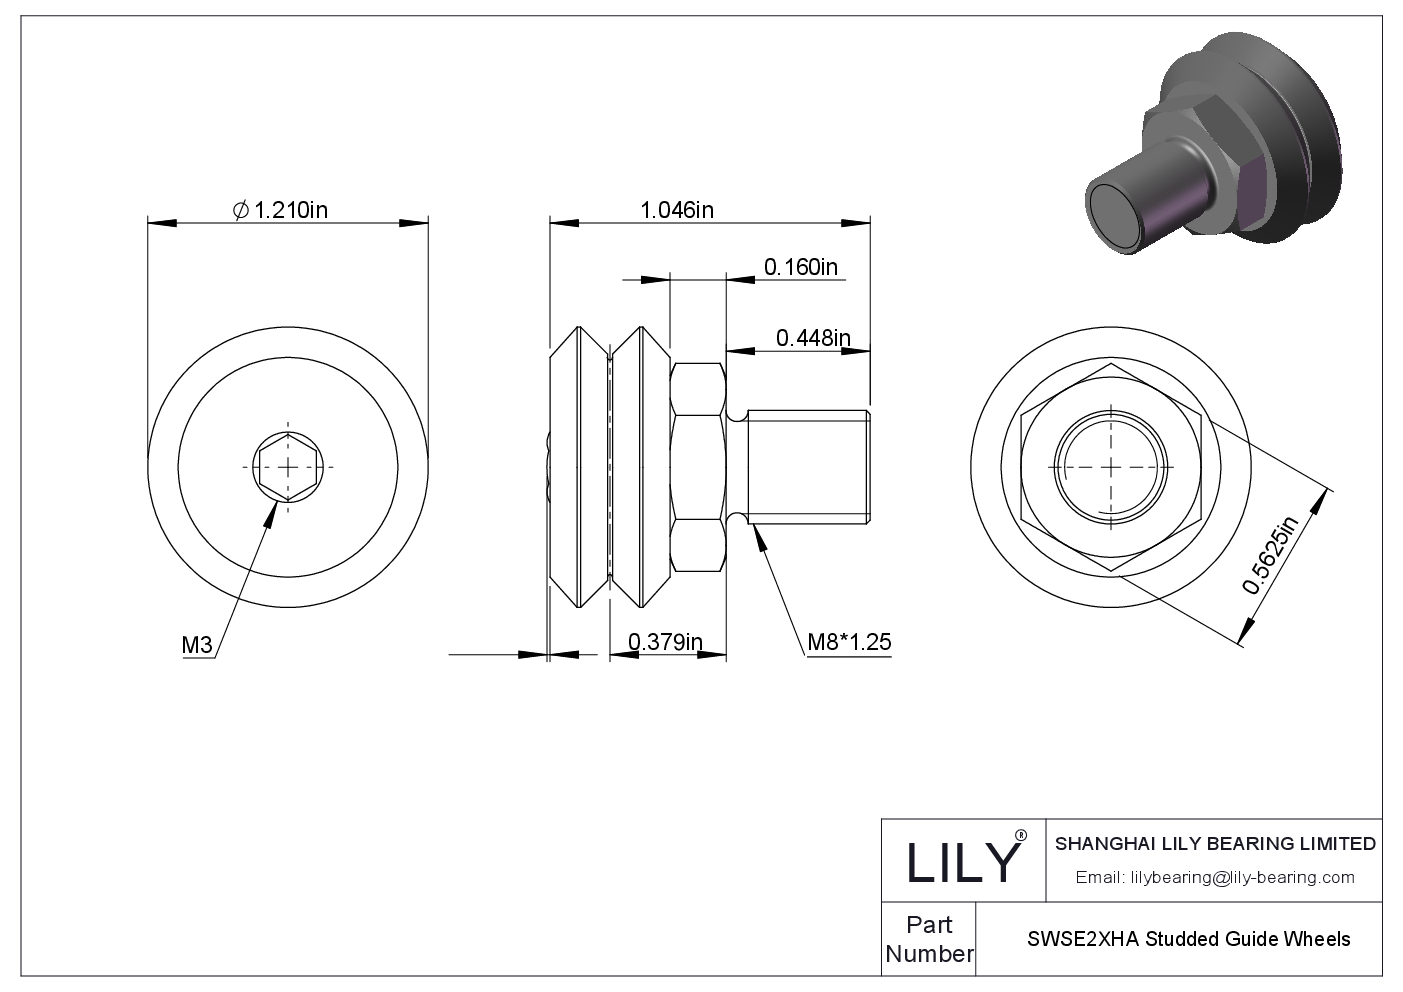 SWSE2XHA Studded Guide Wheels cad drawing